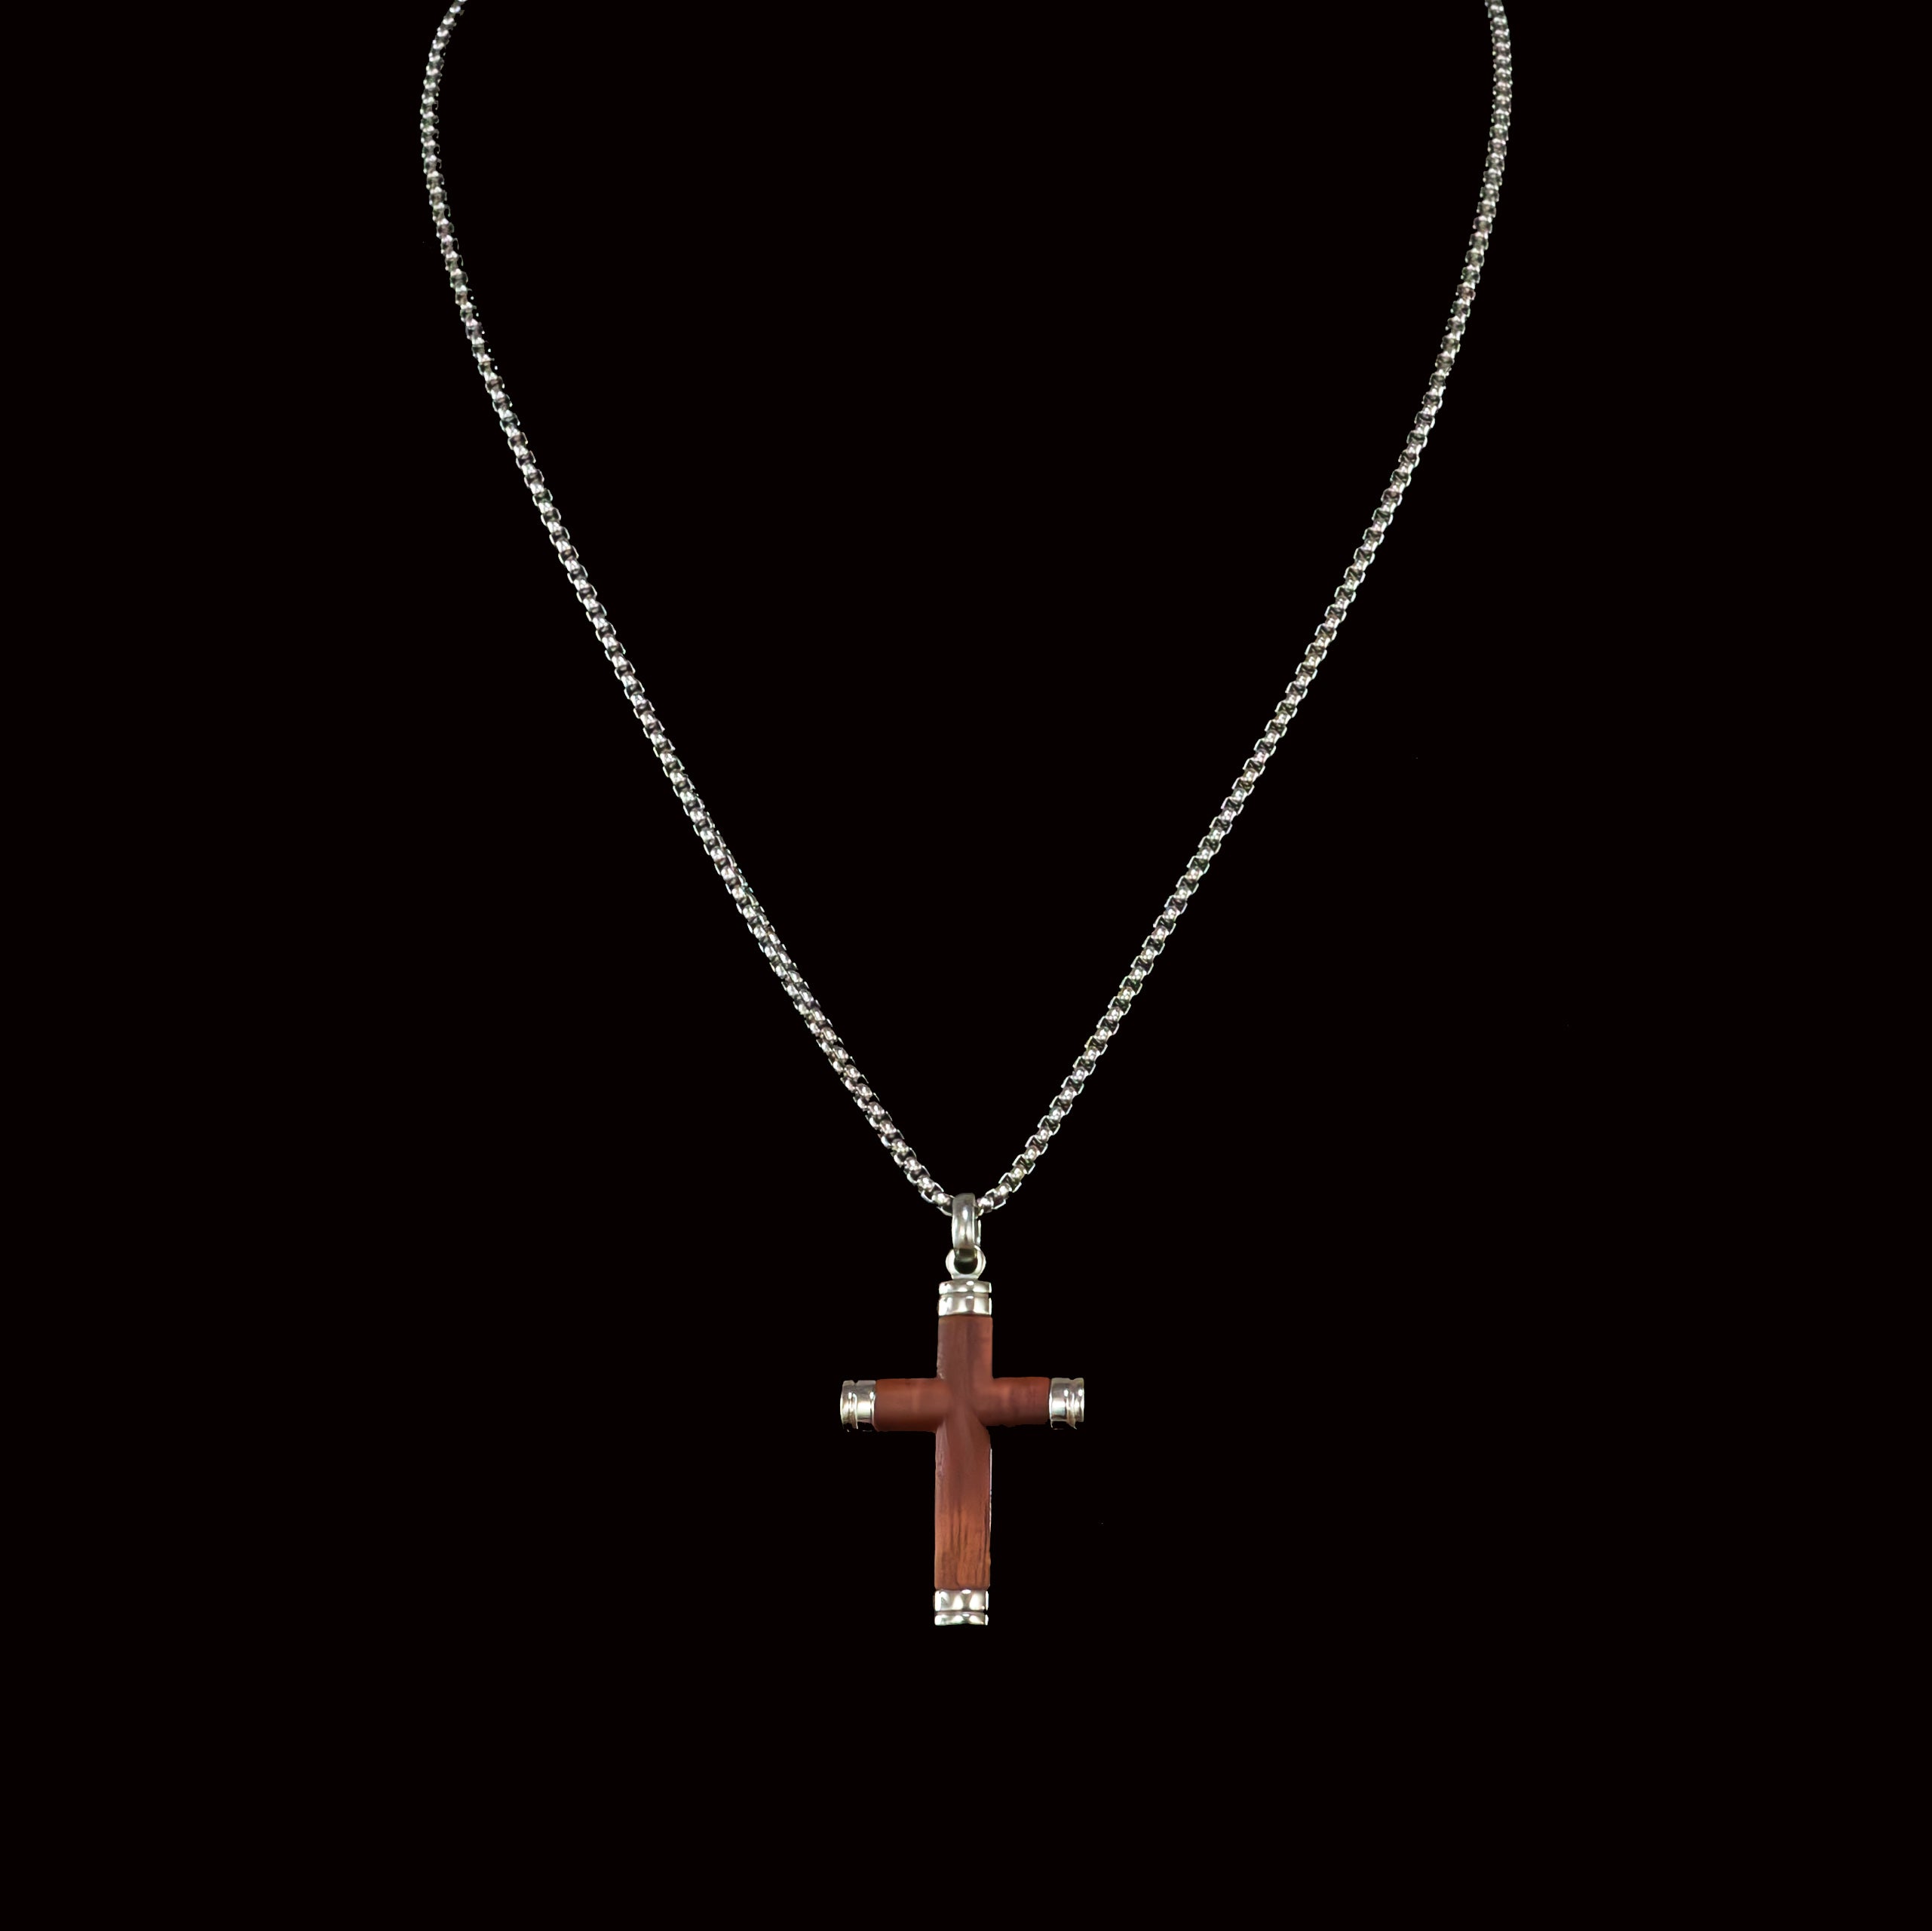 Eligio Stainless Steel Chain Necklace with Rosewood Crucifix